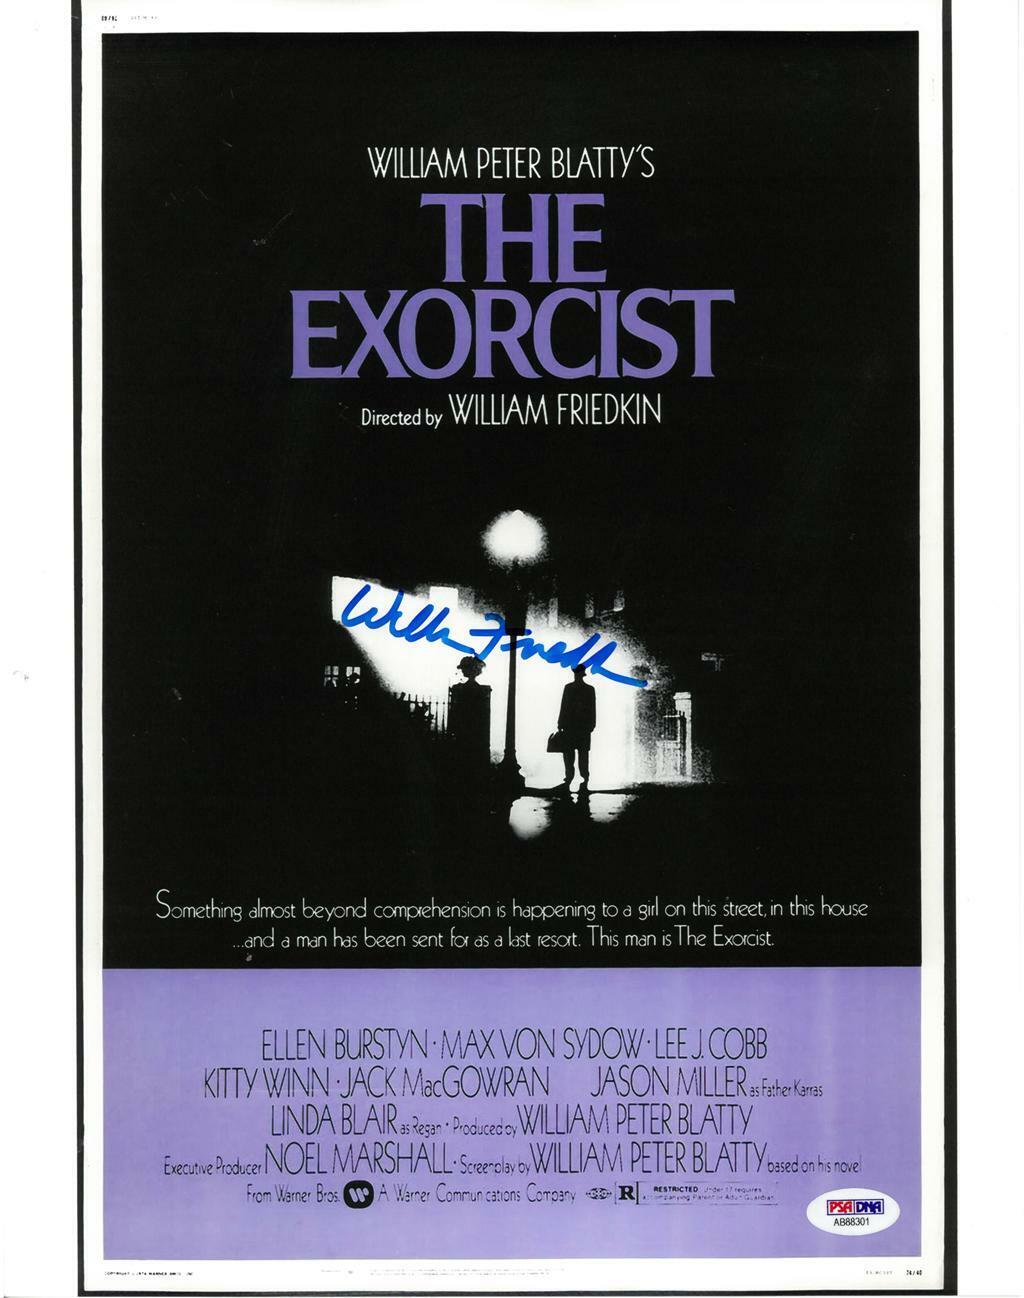 William Friedkin Signed The Exorcist Autographed 11x14 Photo Poster painting PSA/DNA #AB88301